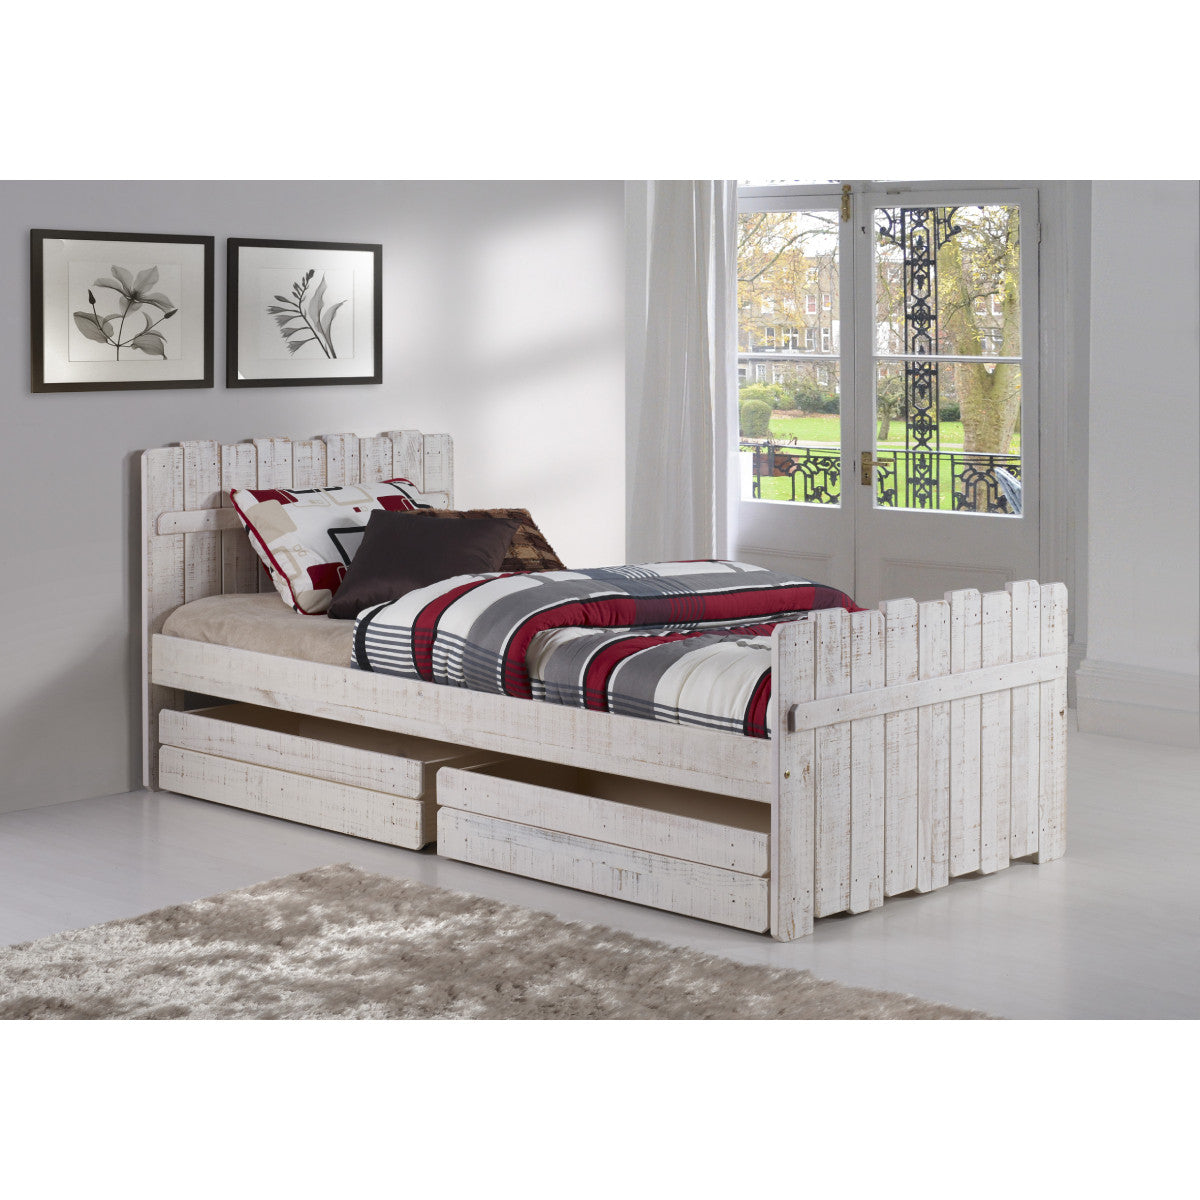 TWIN TREE HOUSE BED RUSTIC SAND W/DRAWERS